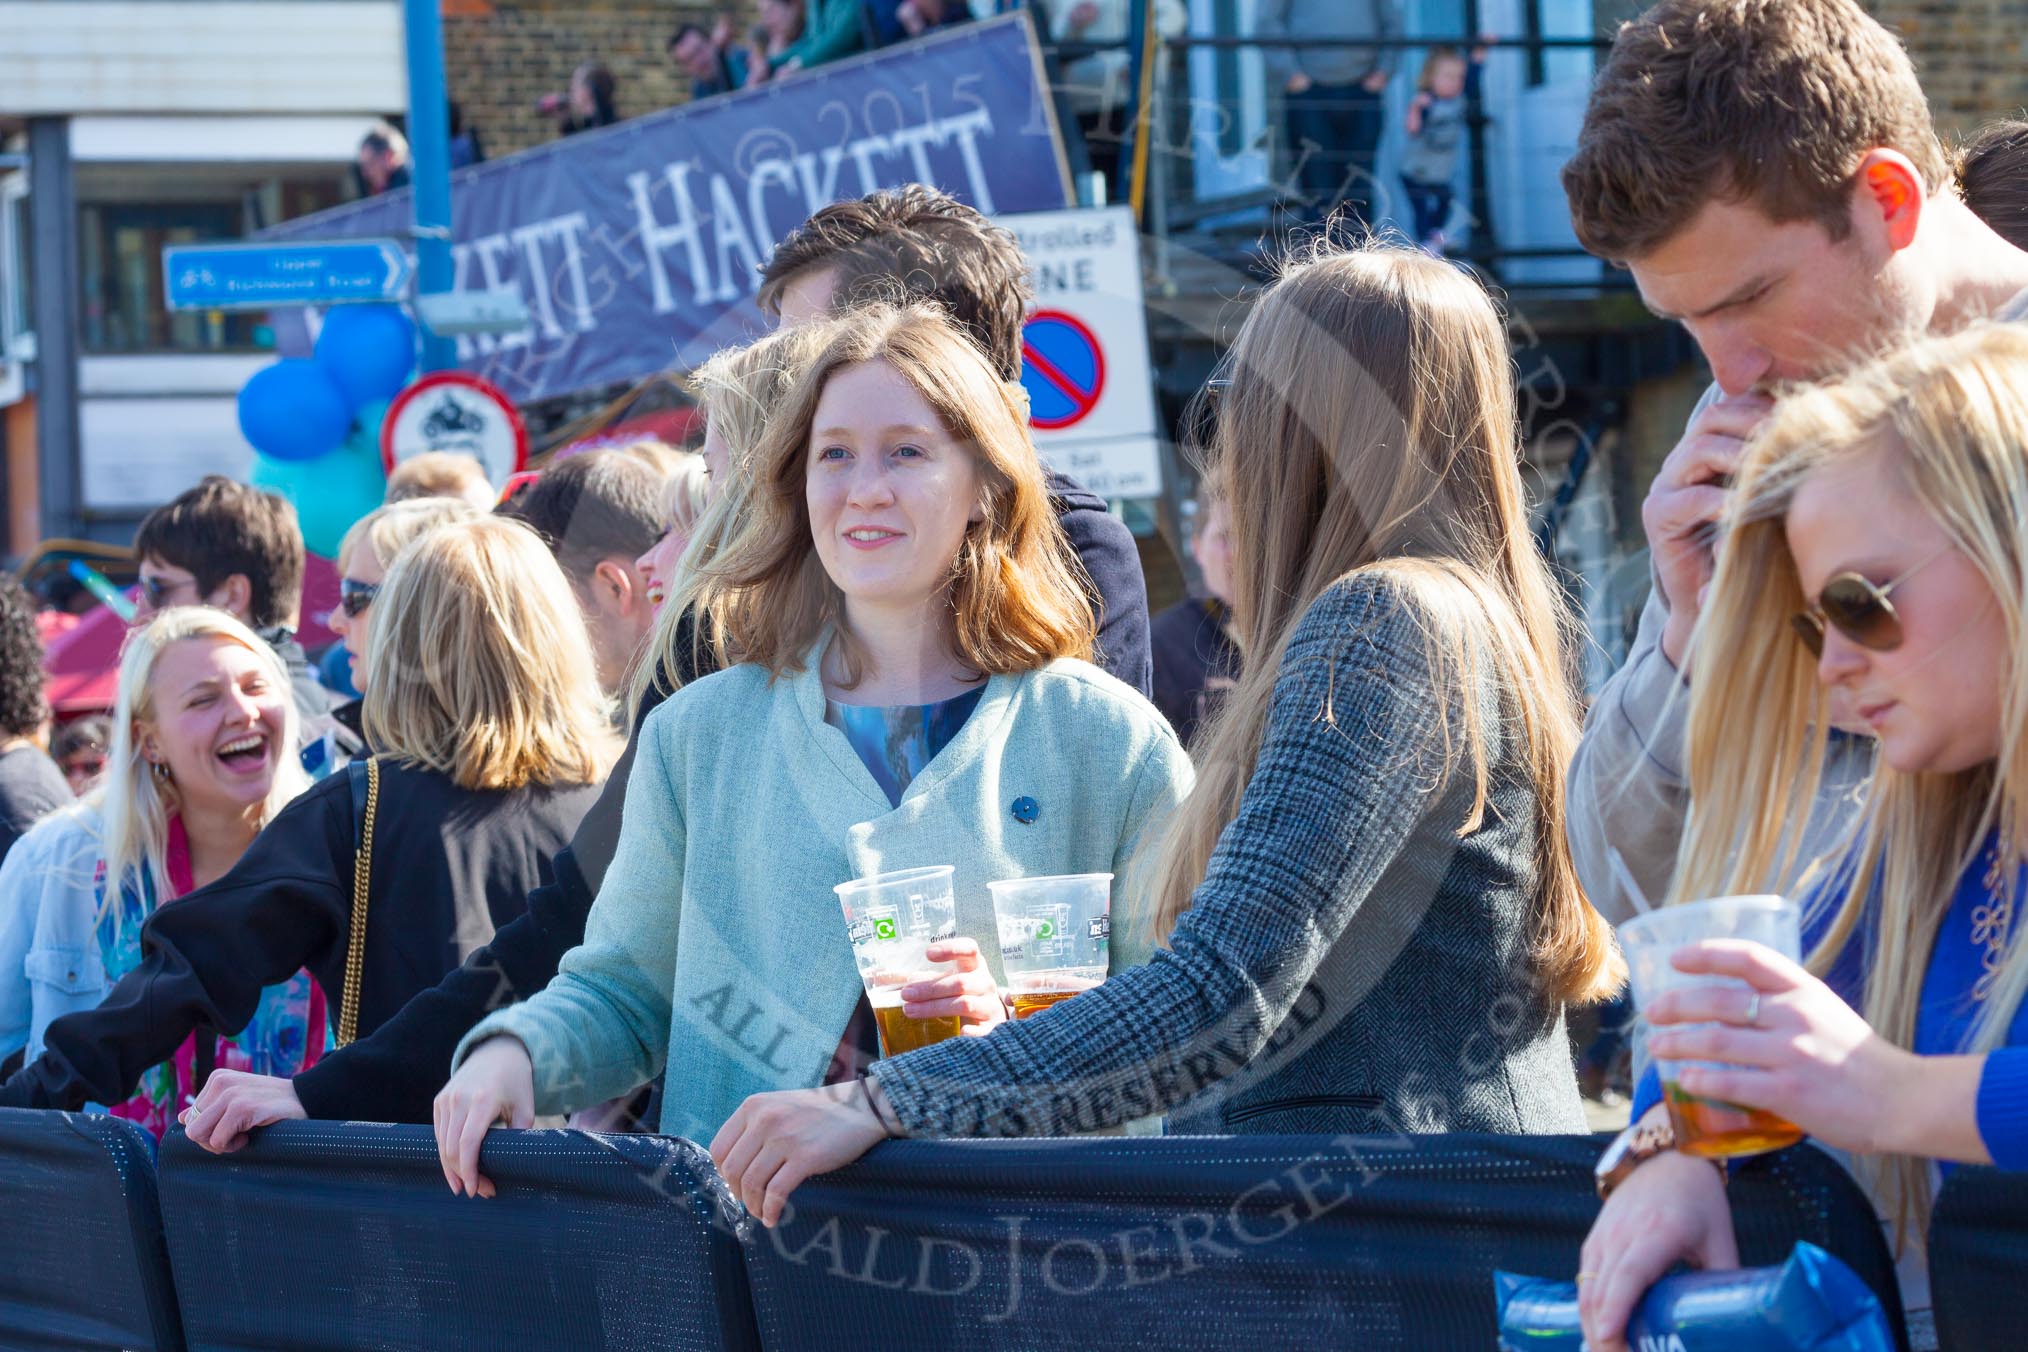 The Boat Race season 2015 - Newton Women's Boat Race.
River Thames between Putney and Mortlake,
London,

United Kingdom,
on 11 April 2015 at 15:35, image #59